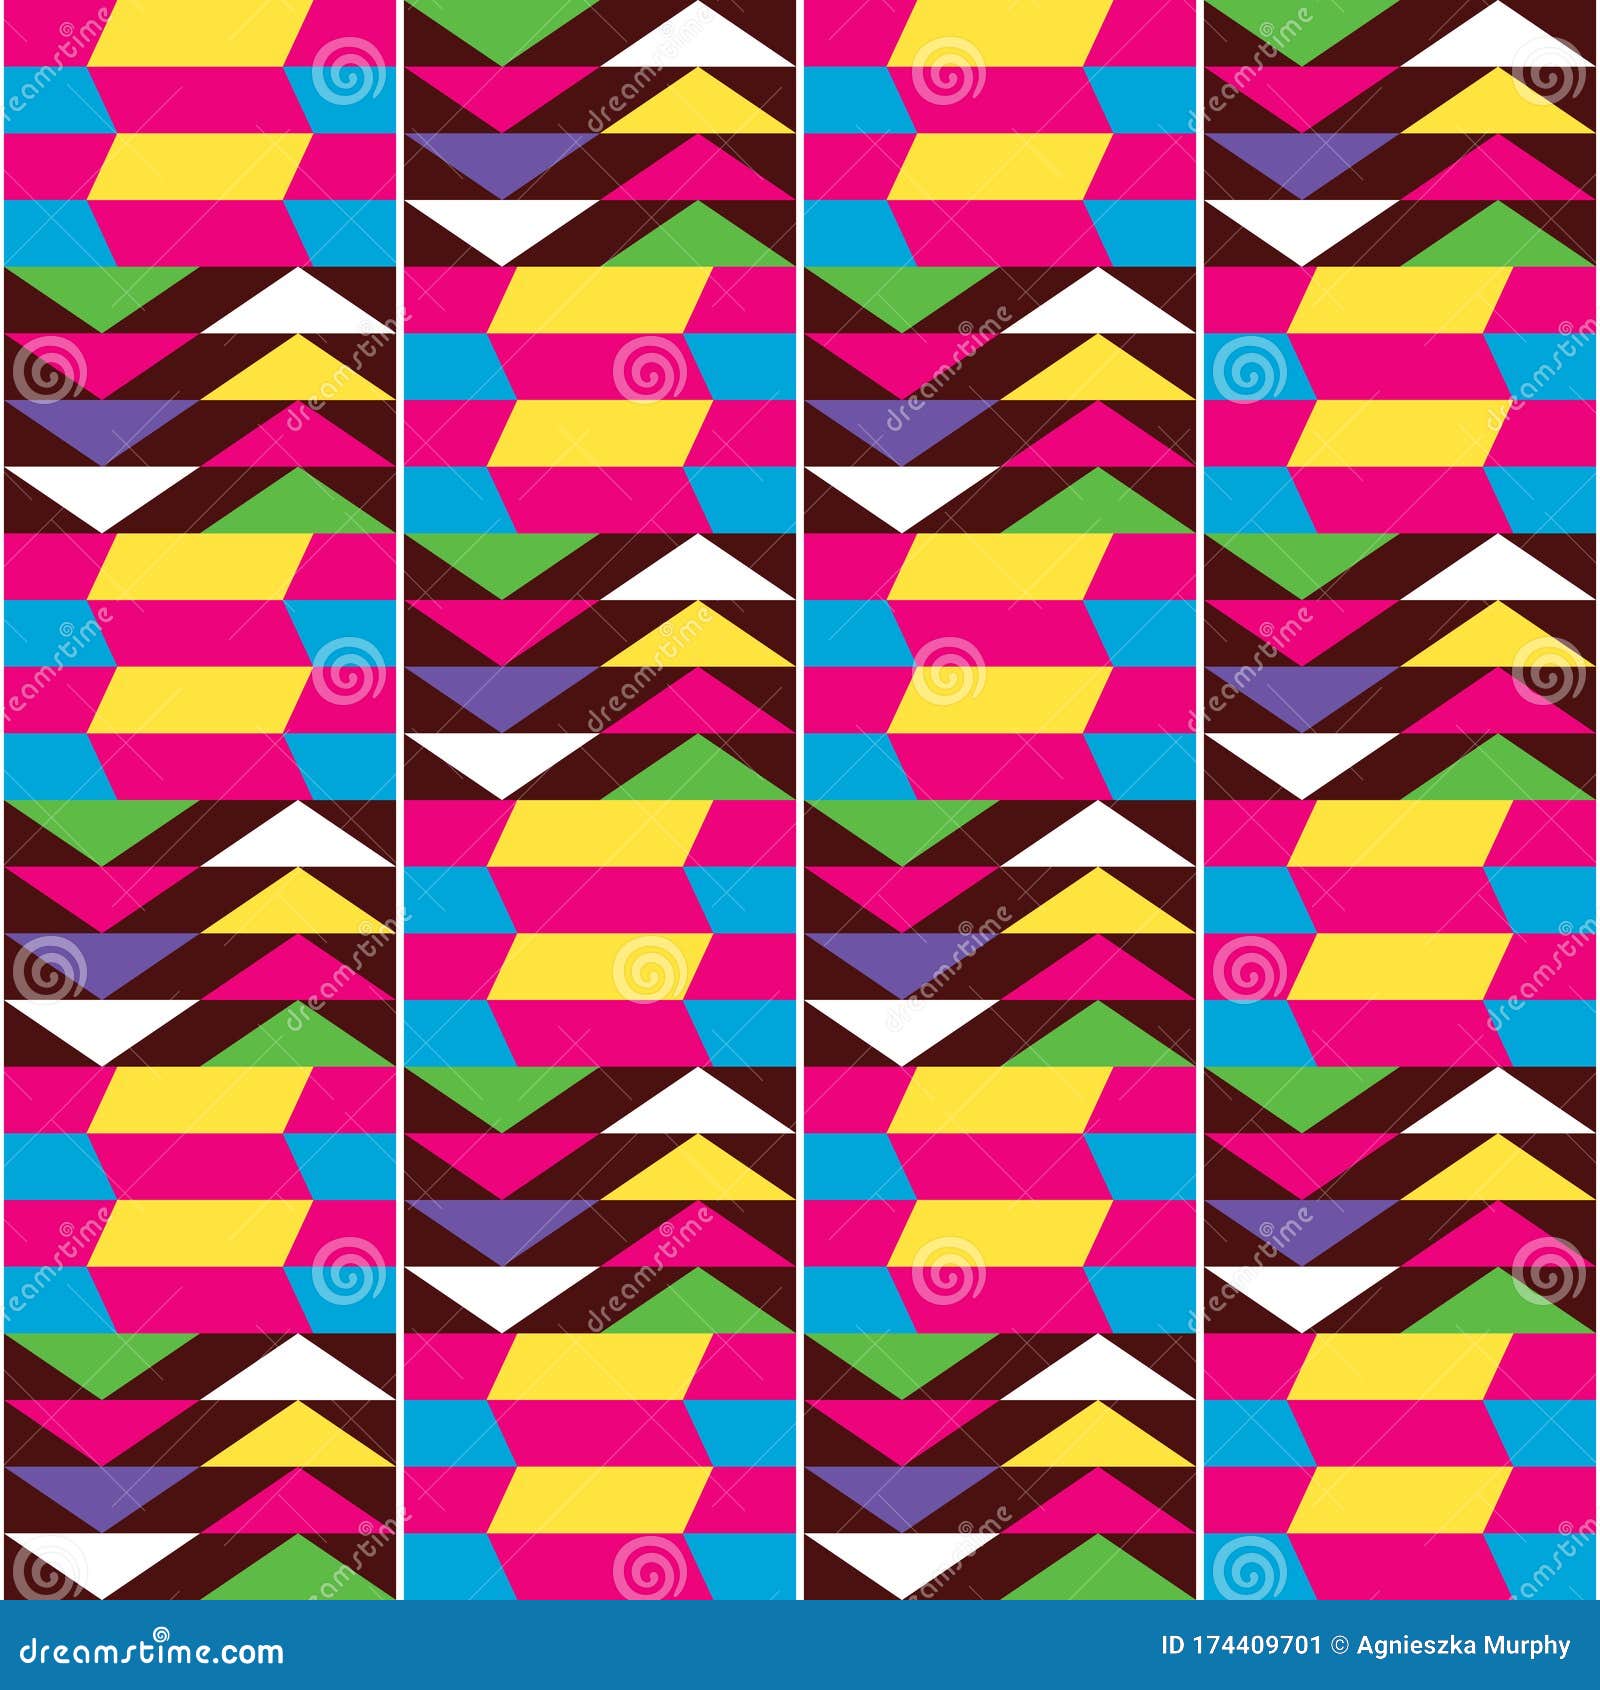 African Kente Cloth Style Vector Seamless Textile Pattern, Tribal